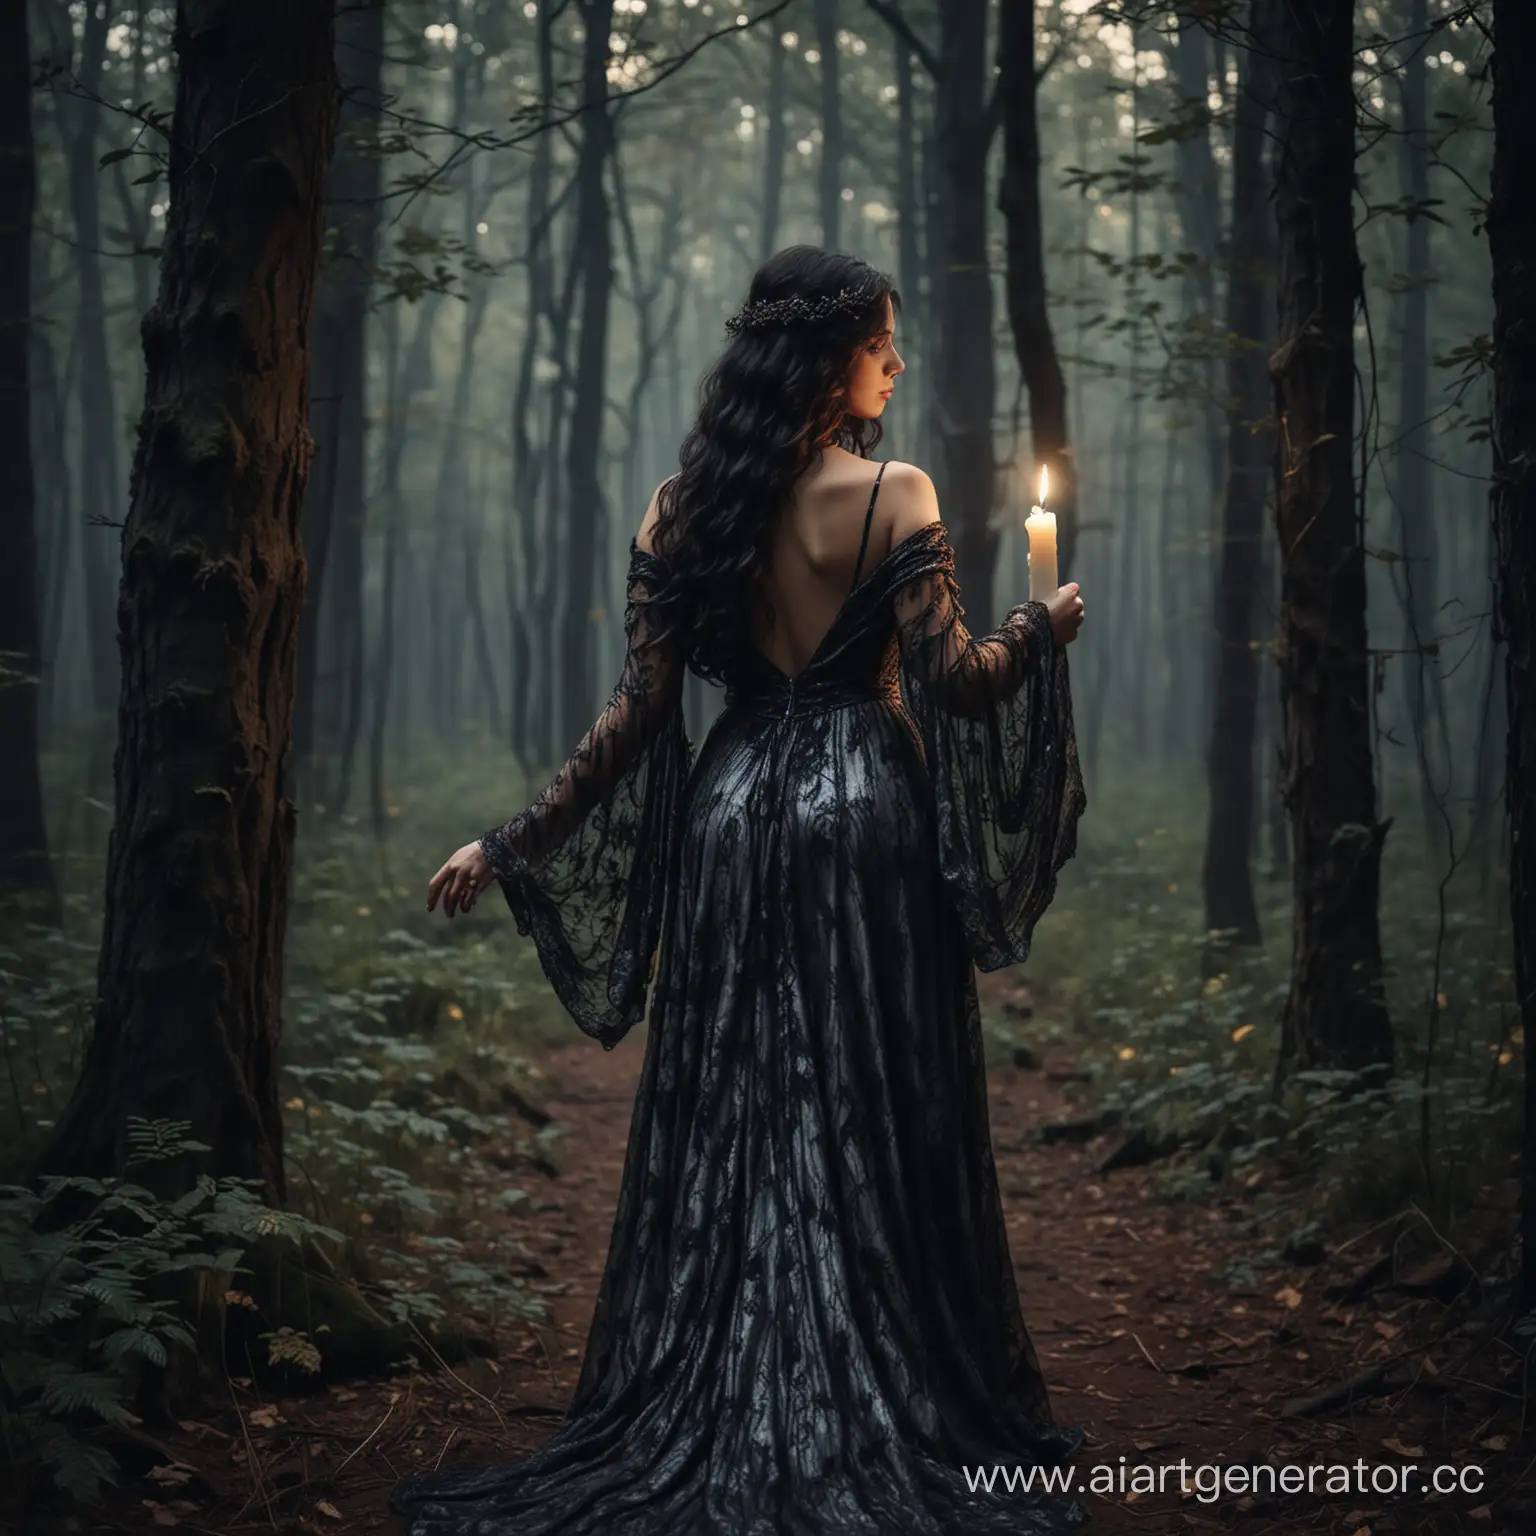 Mystical-Clairvoyant-Girl-with-Candle-in-Enigmatic-Forest